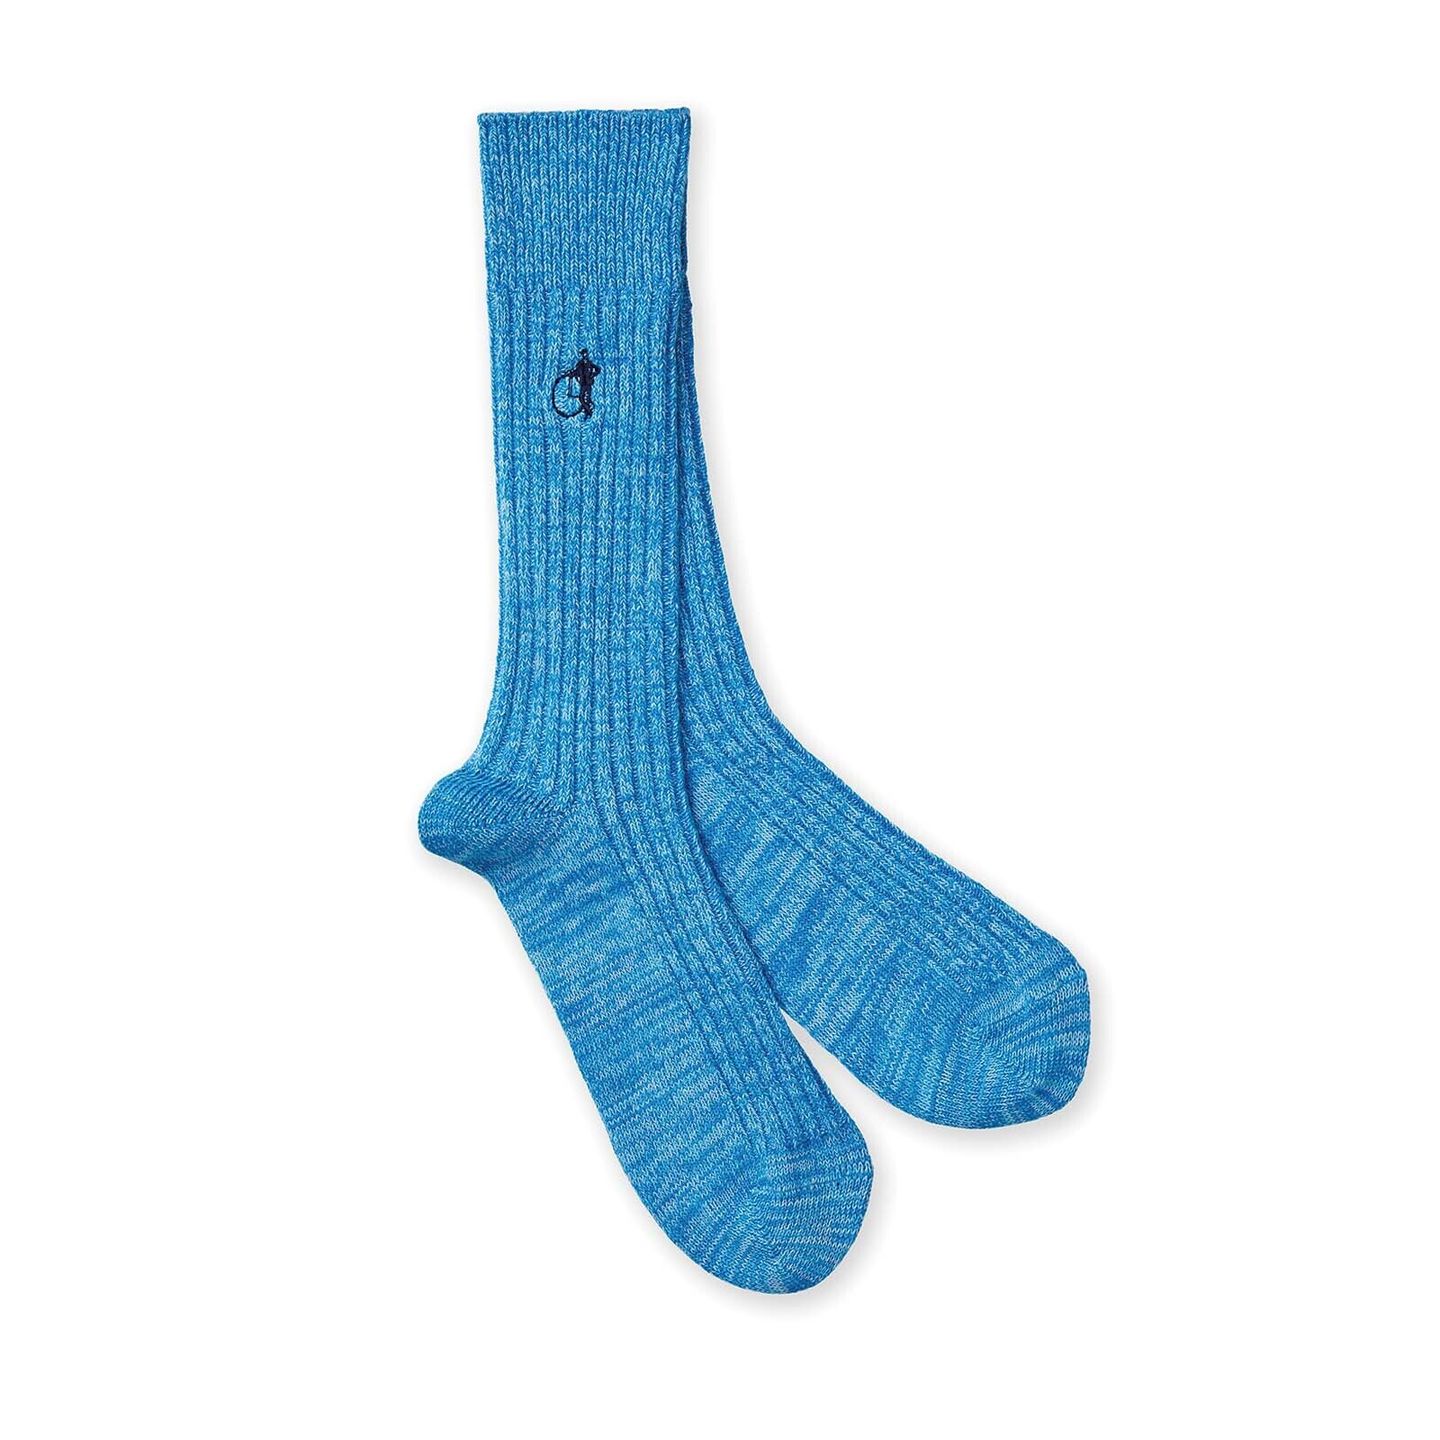 Boot Socks In A Turquoise colour with London Sock Company logo